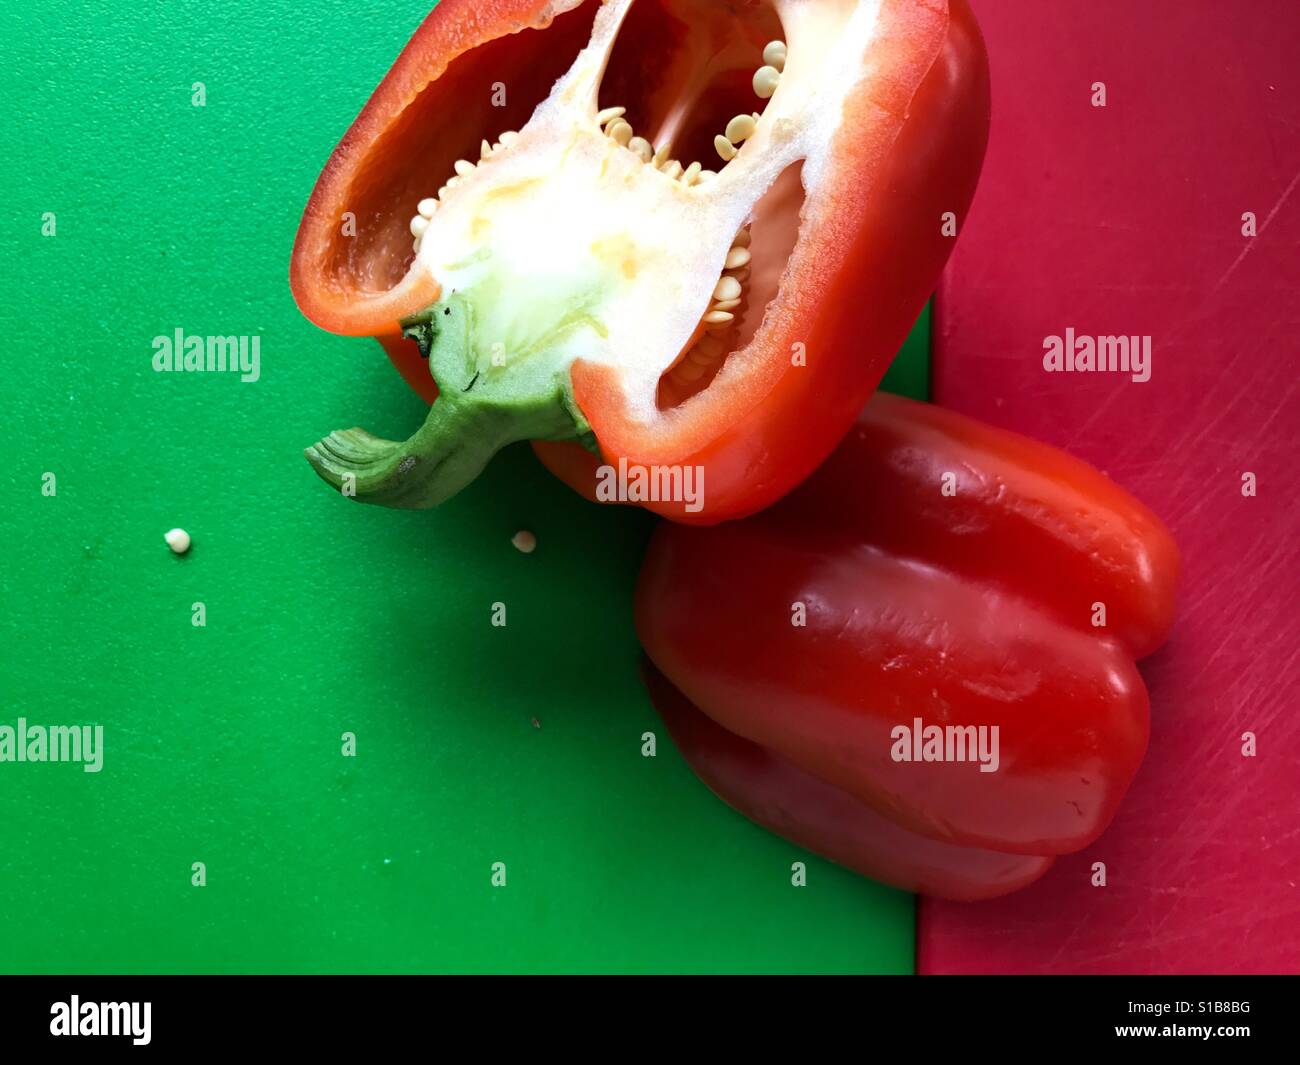 Red bell pepper on green and red Stock Photo